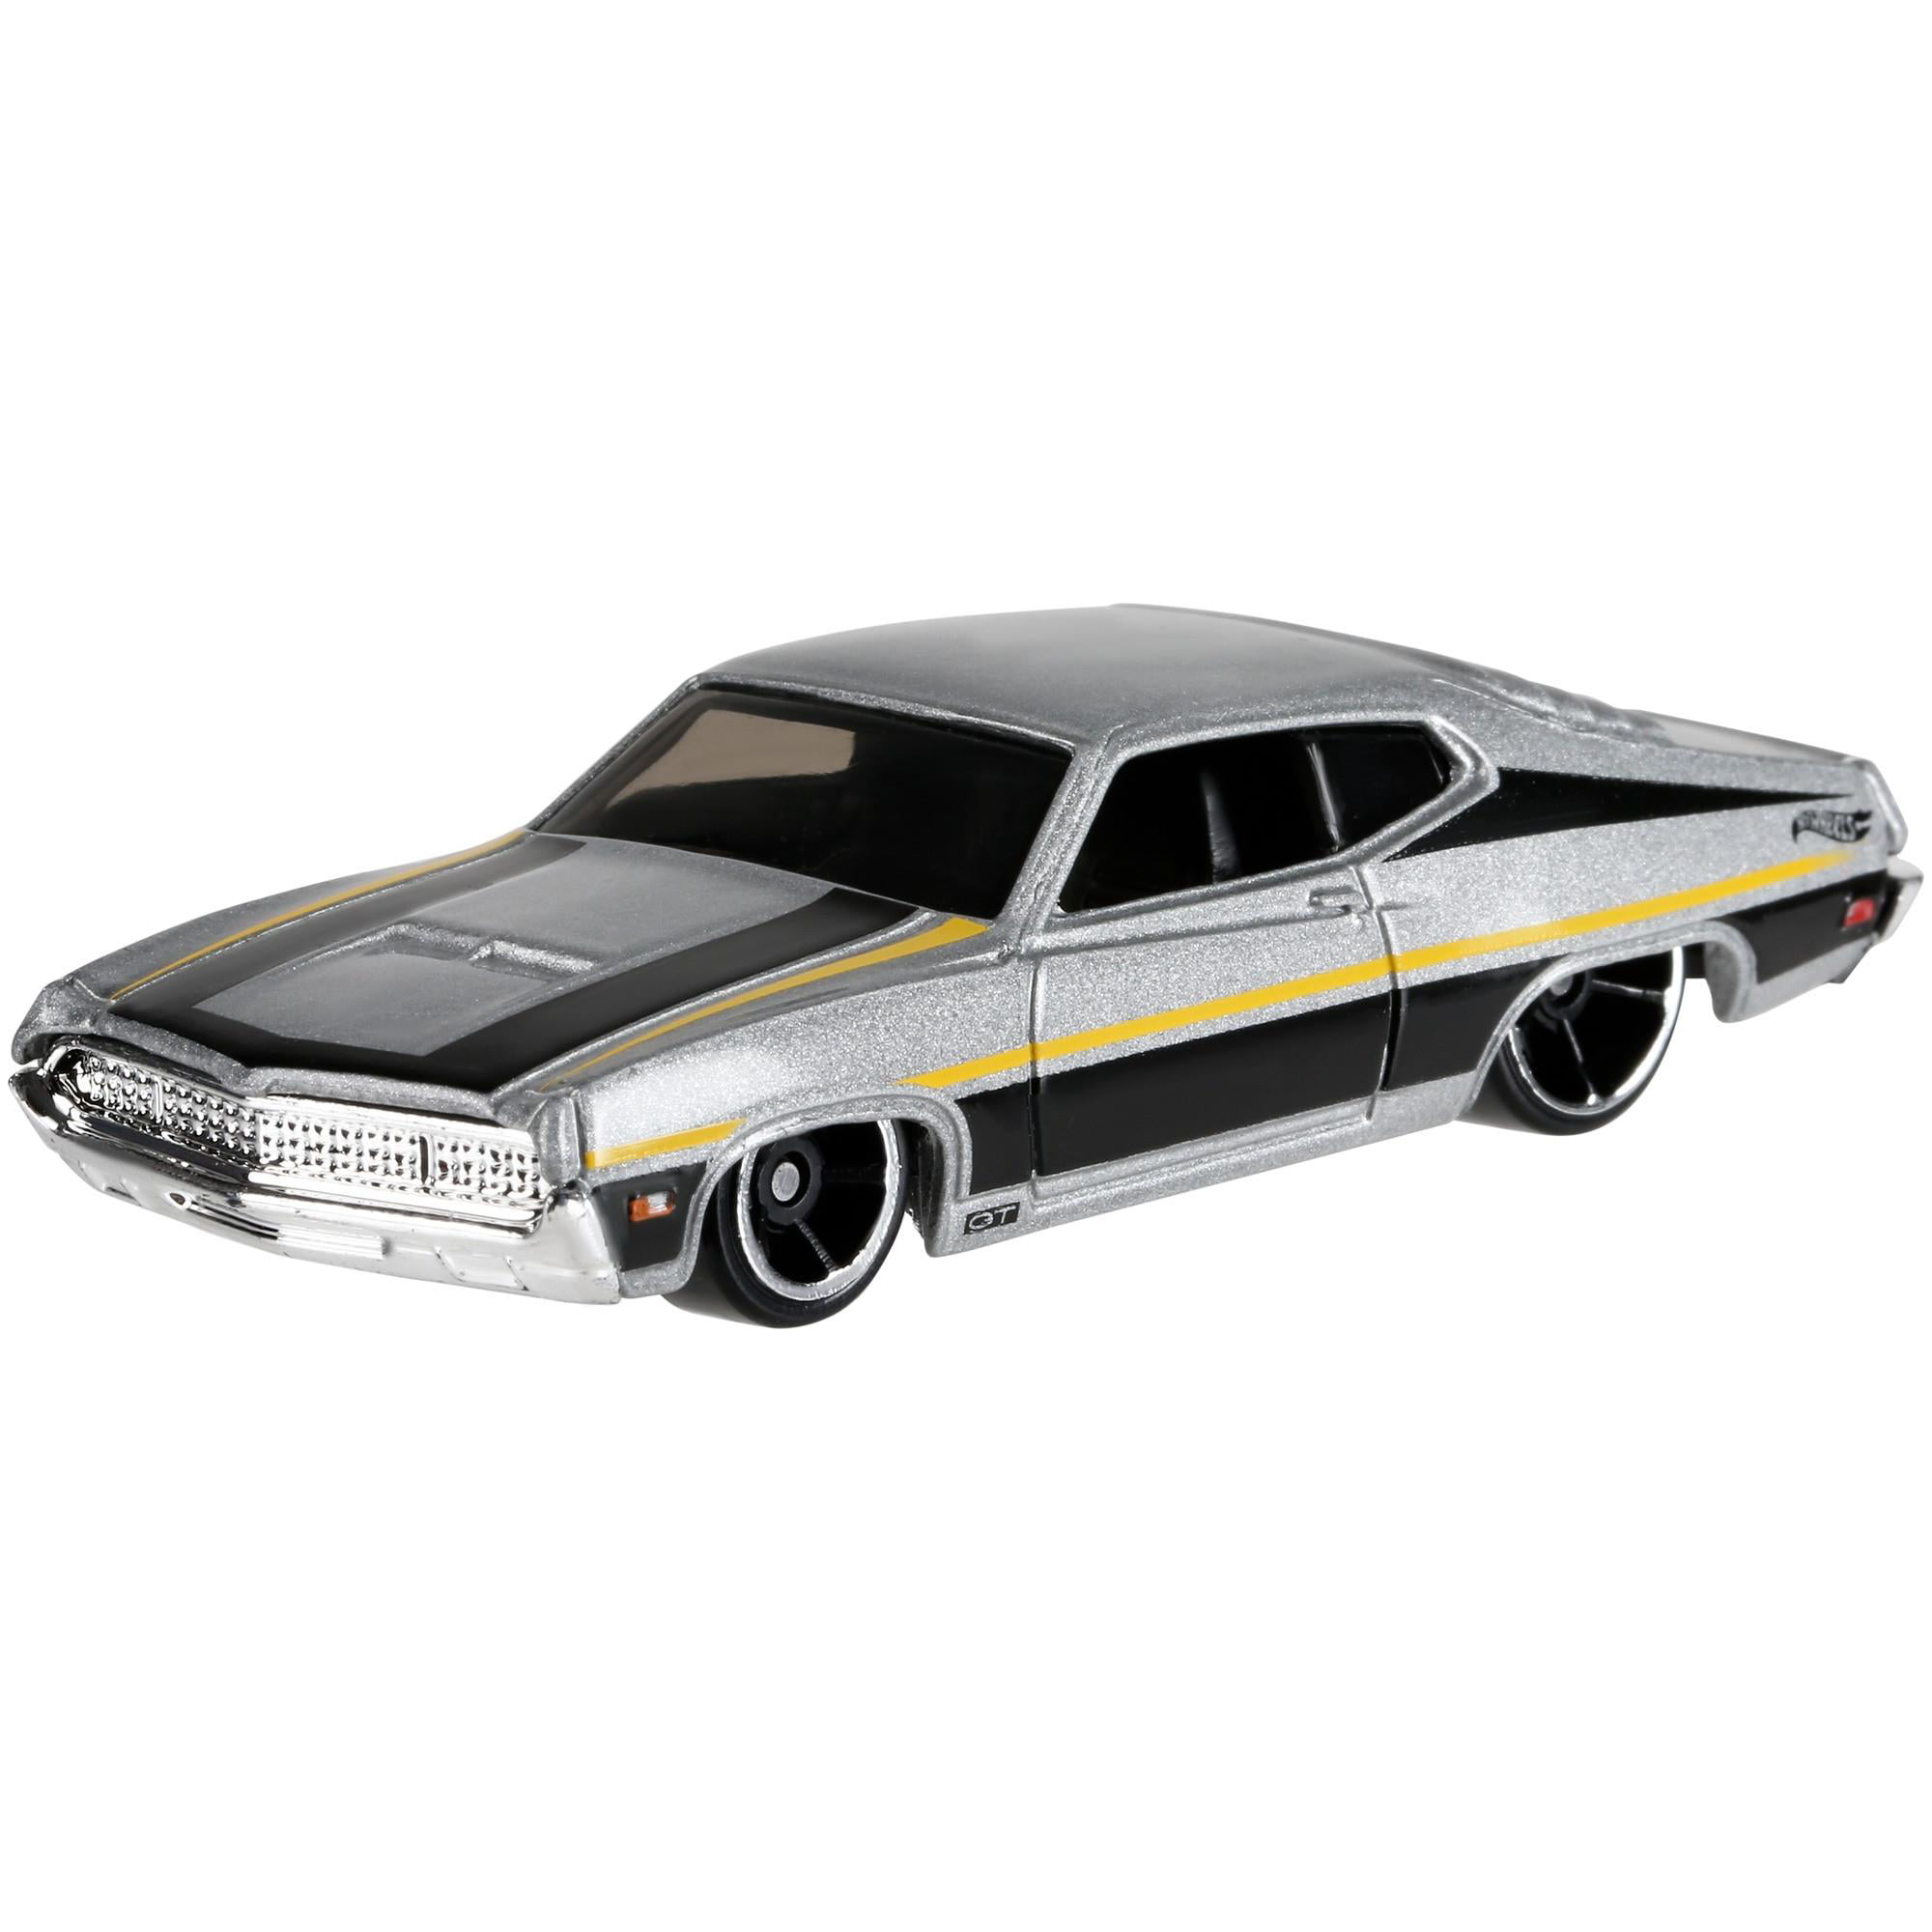 GRAY 1970 FORD TORINO 2019 HOT WHEELS WALMART EXCLUSIVE DETROIT MUSCLE #6/6 